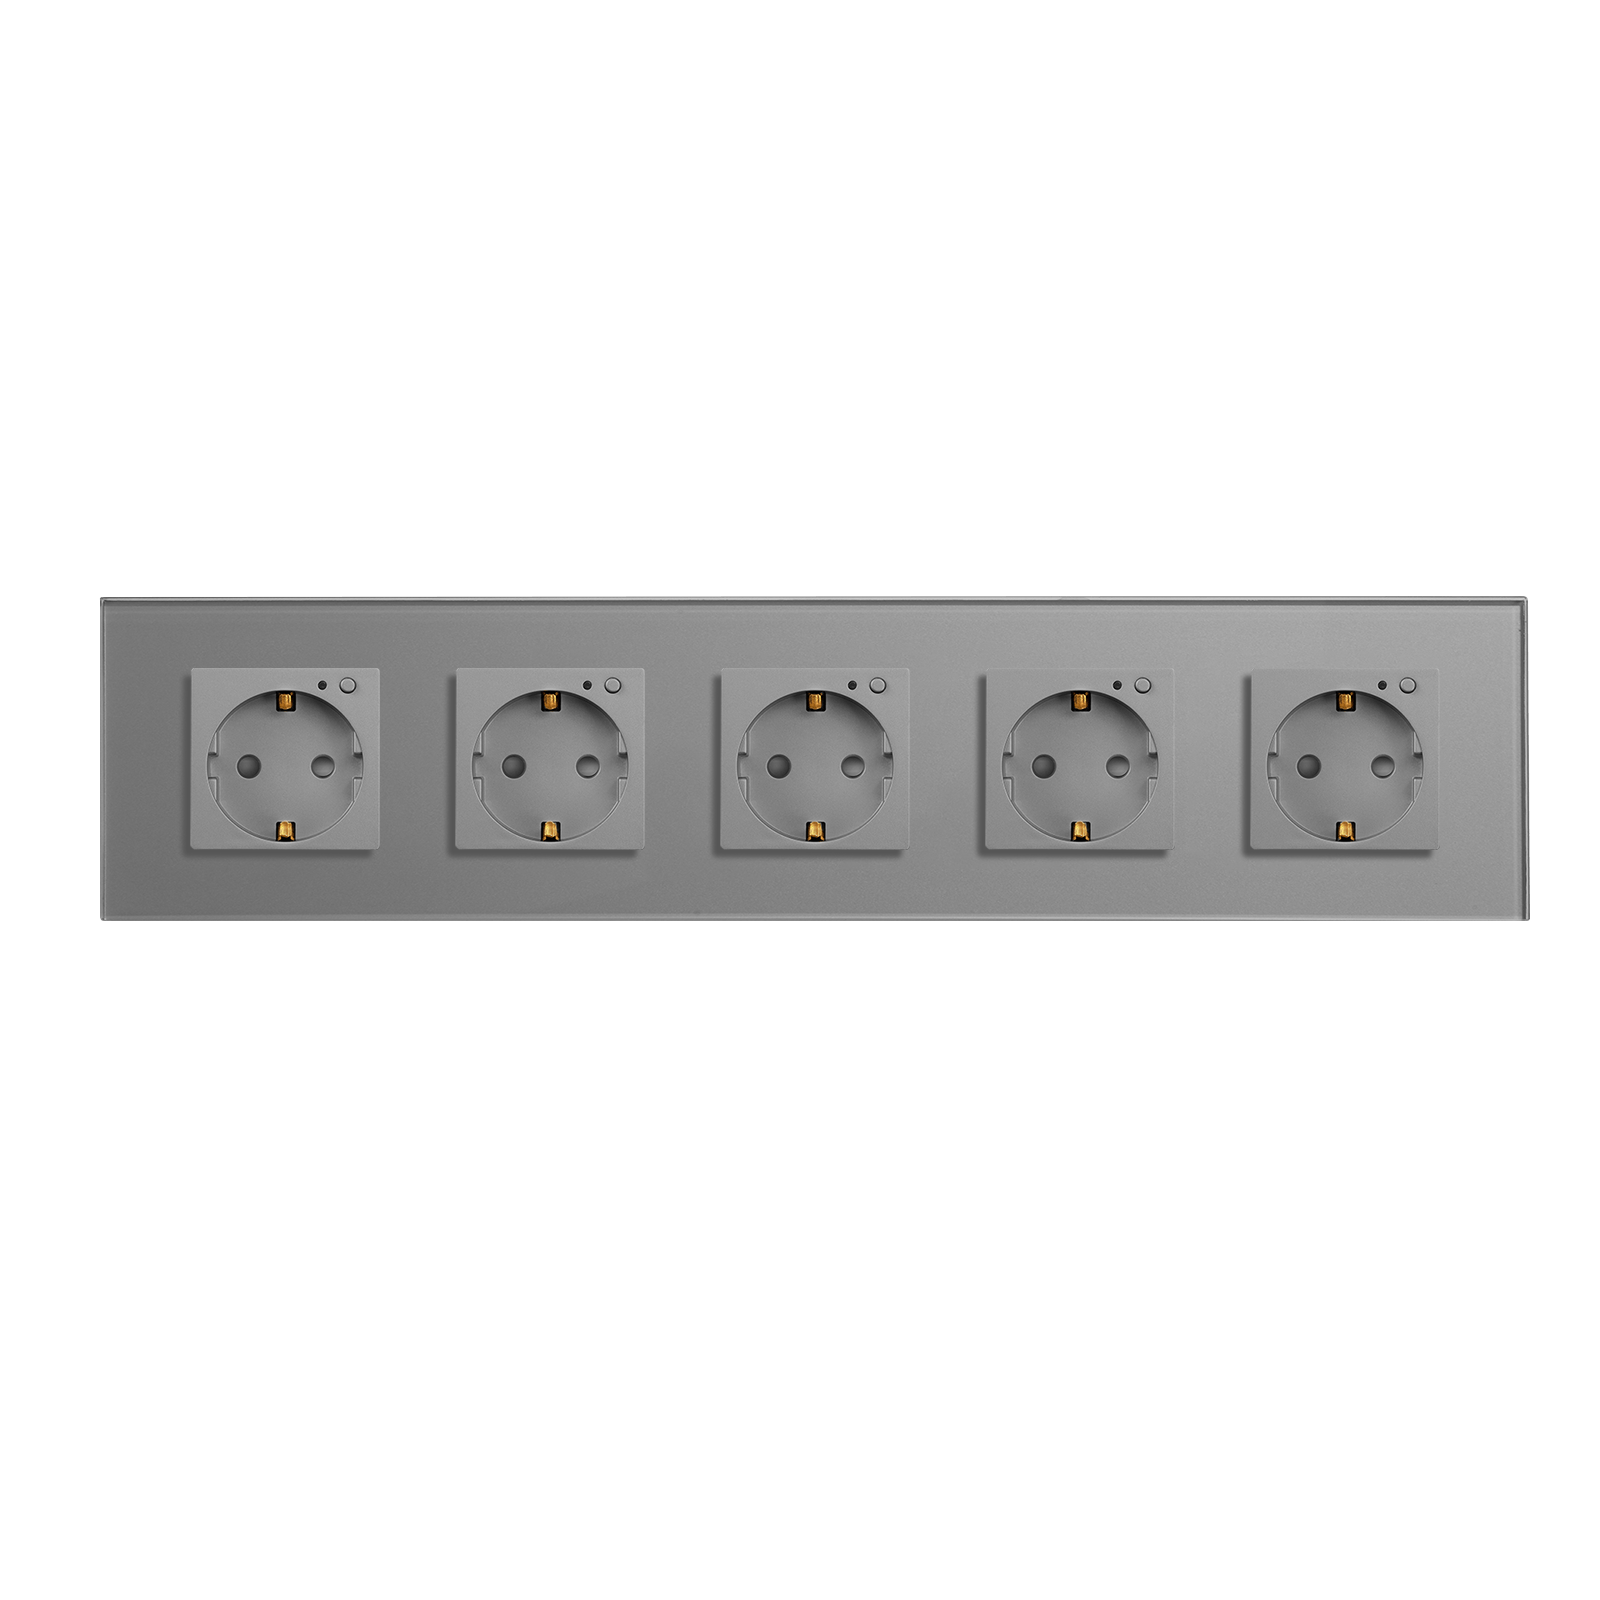 BSEED ZigBee EU Wall Sockets Power Outlets Kids Protection Wall Plates & Covers Bseedswitch grey Quintuple 